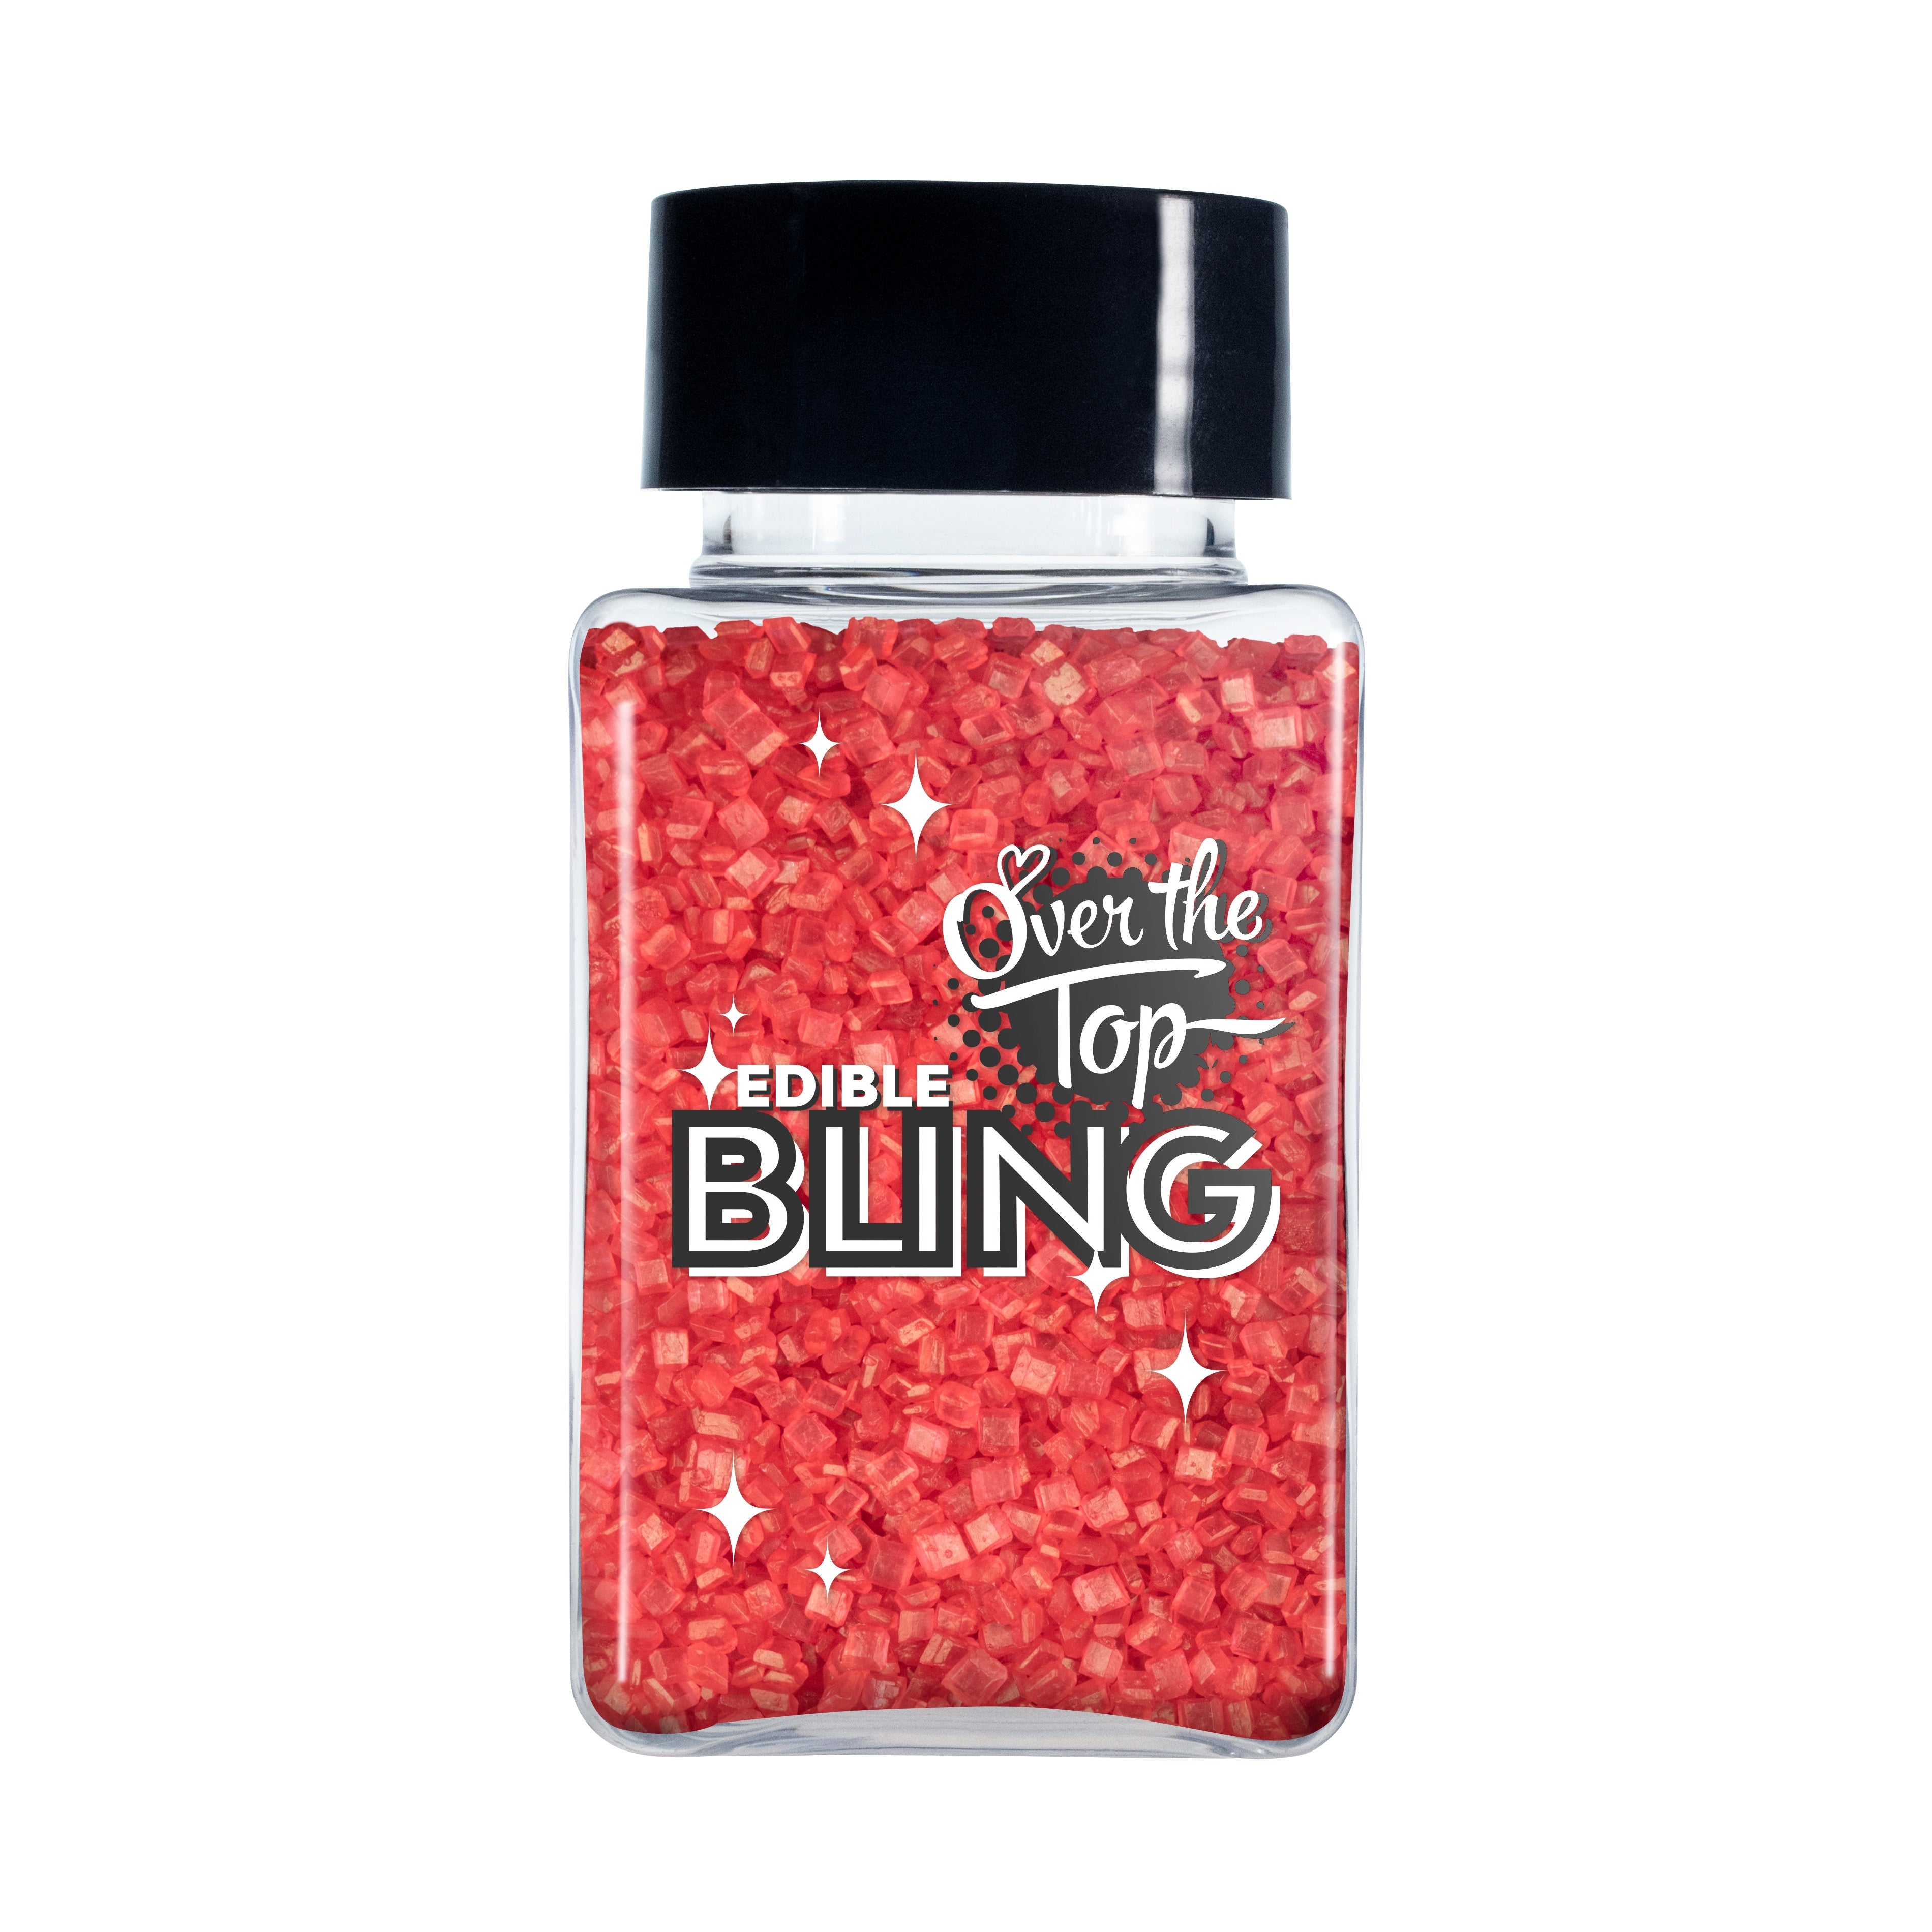 Over The Top Edible Bling Sanding Sugar - Red 80g